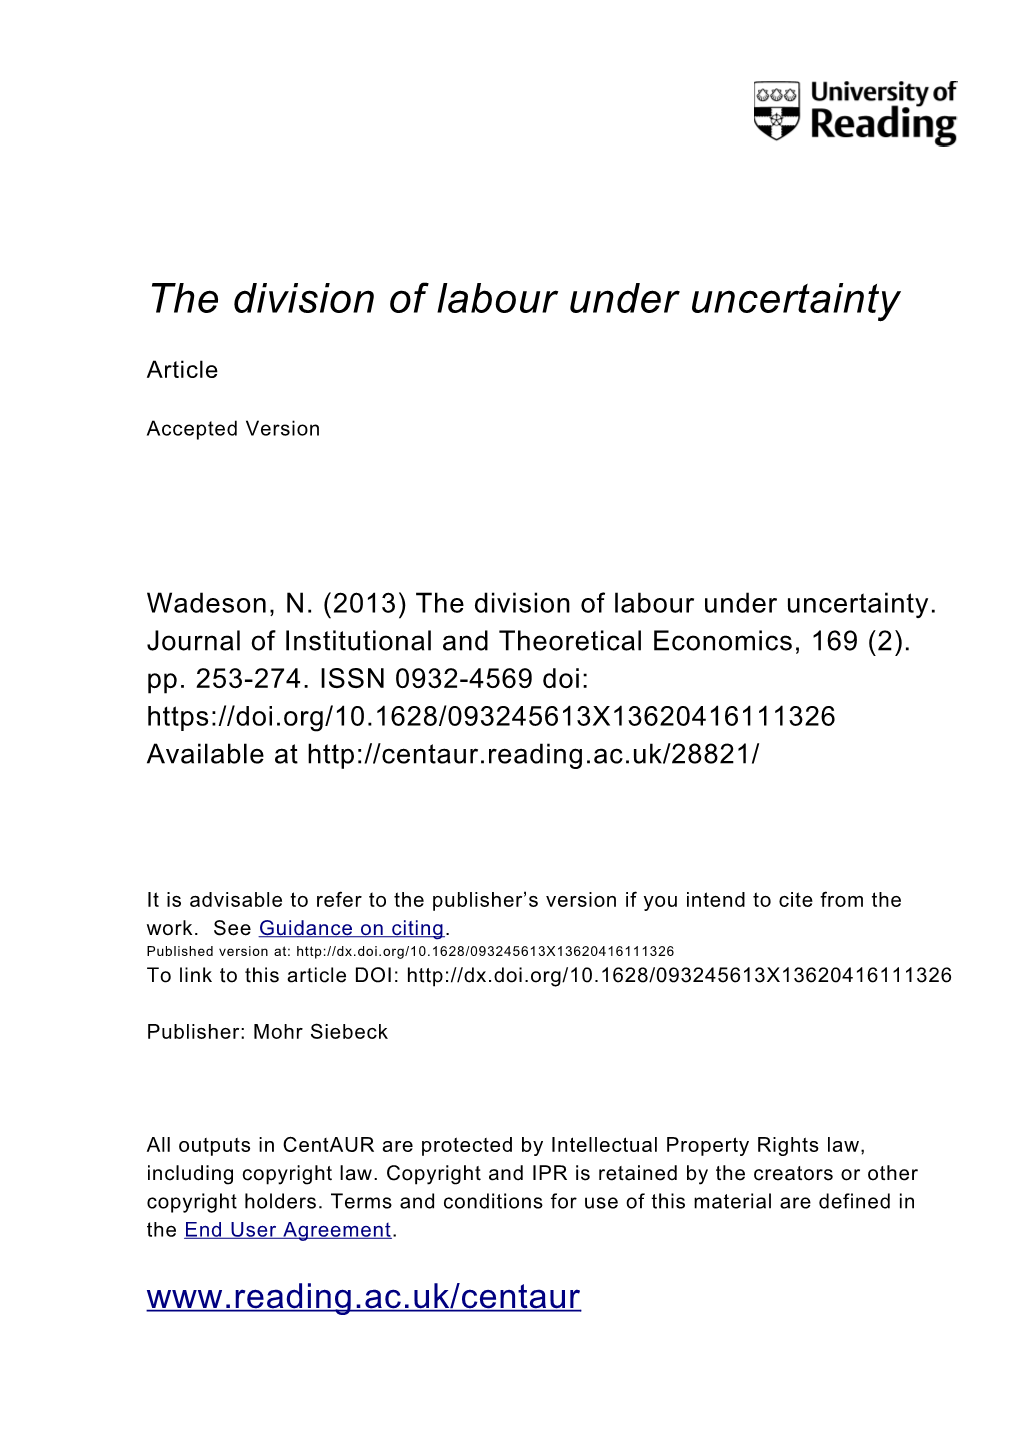 The Division of Labour Under Uncertainty